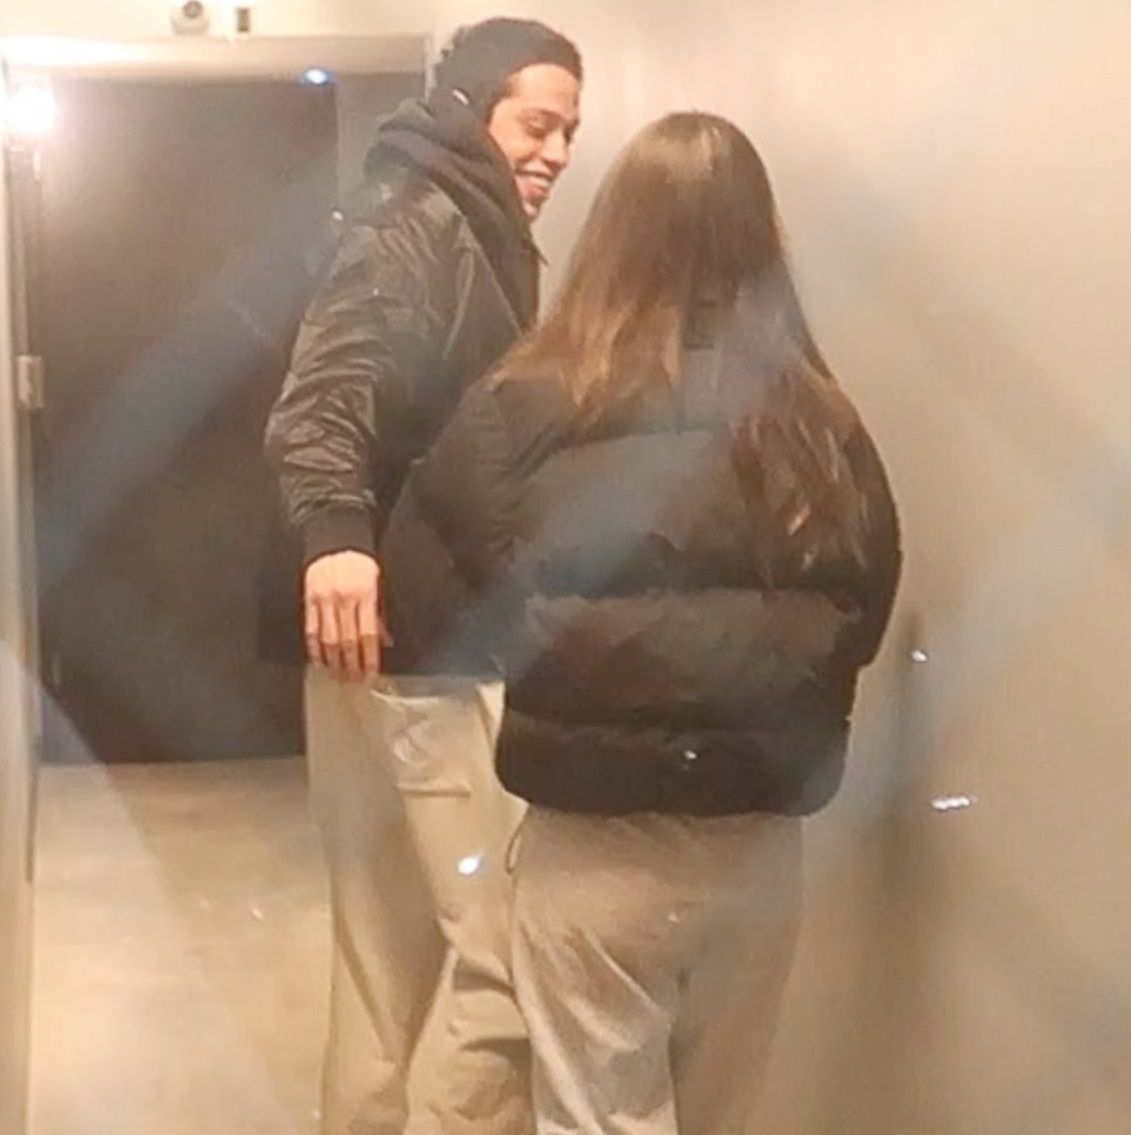 Emily Ratajkowski and ﻿Pete Davidson Spotted Showing PDA in New Video